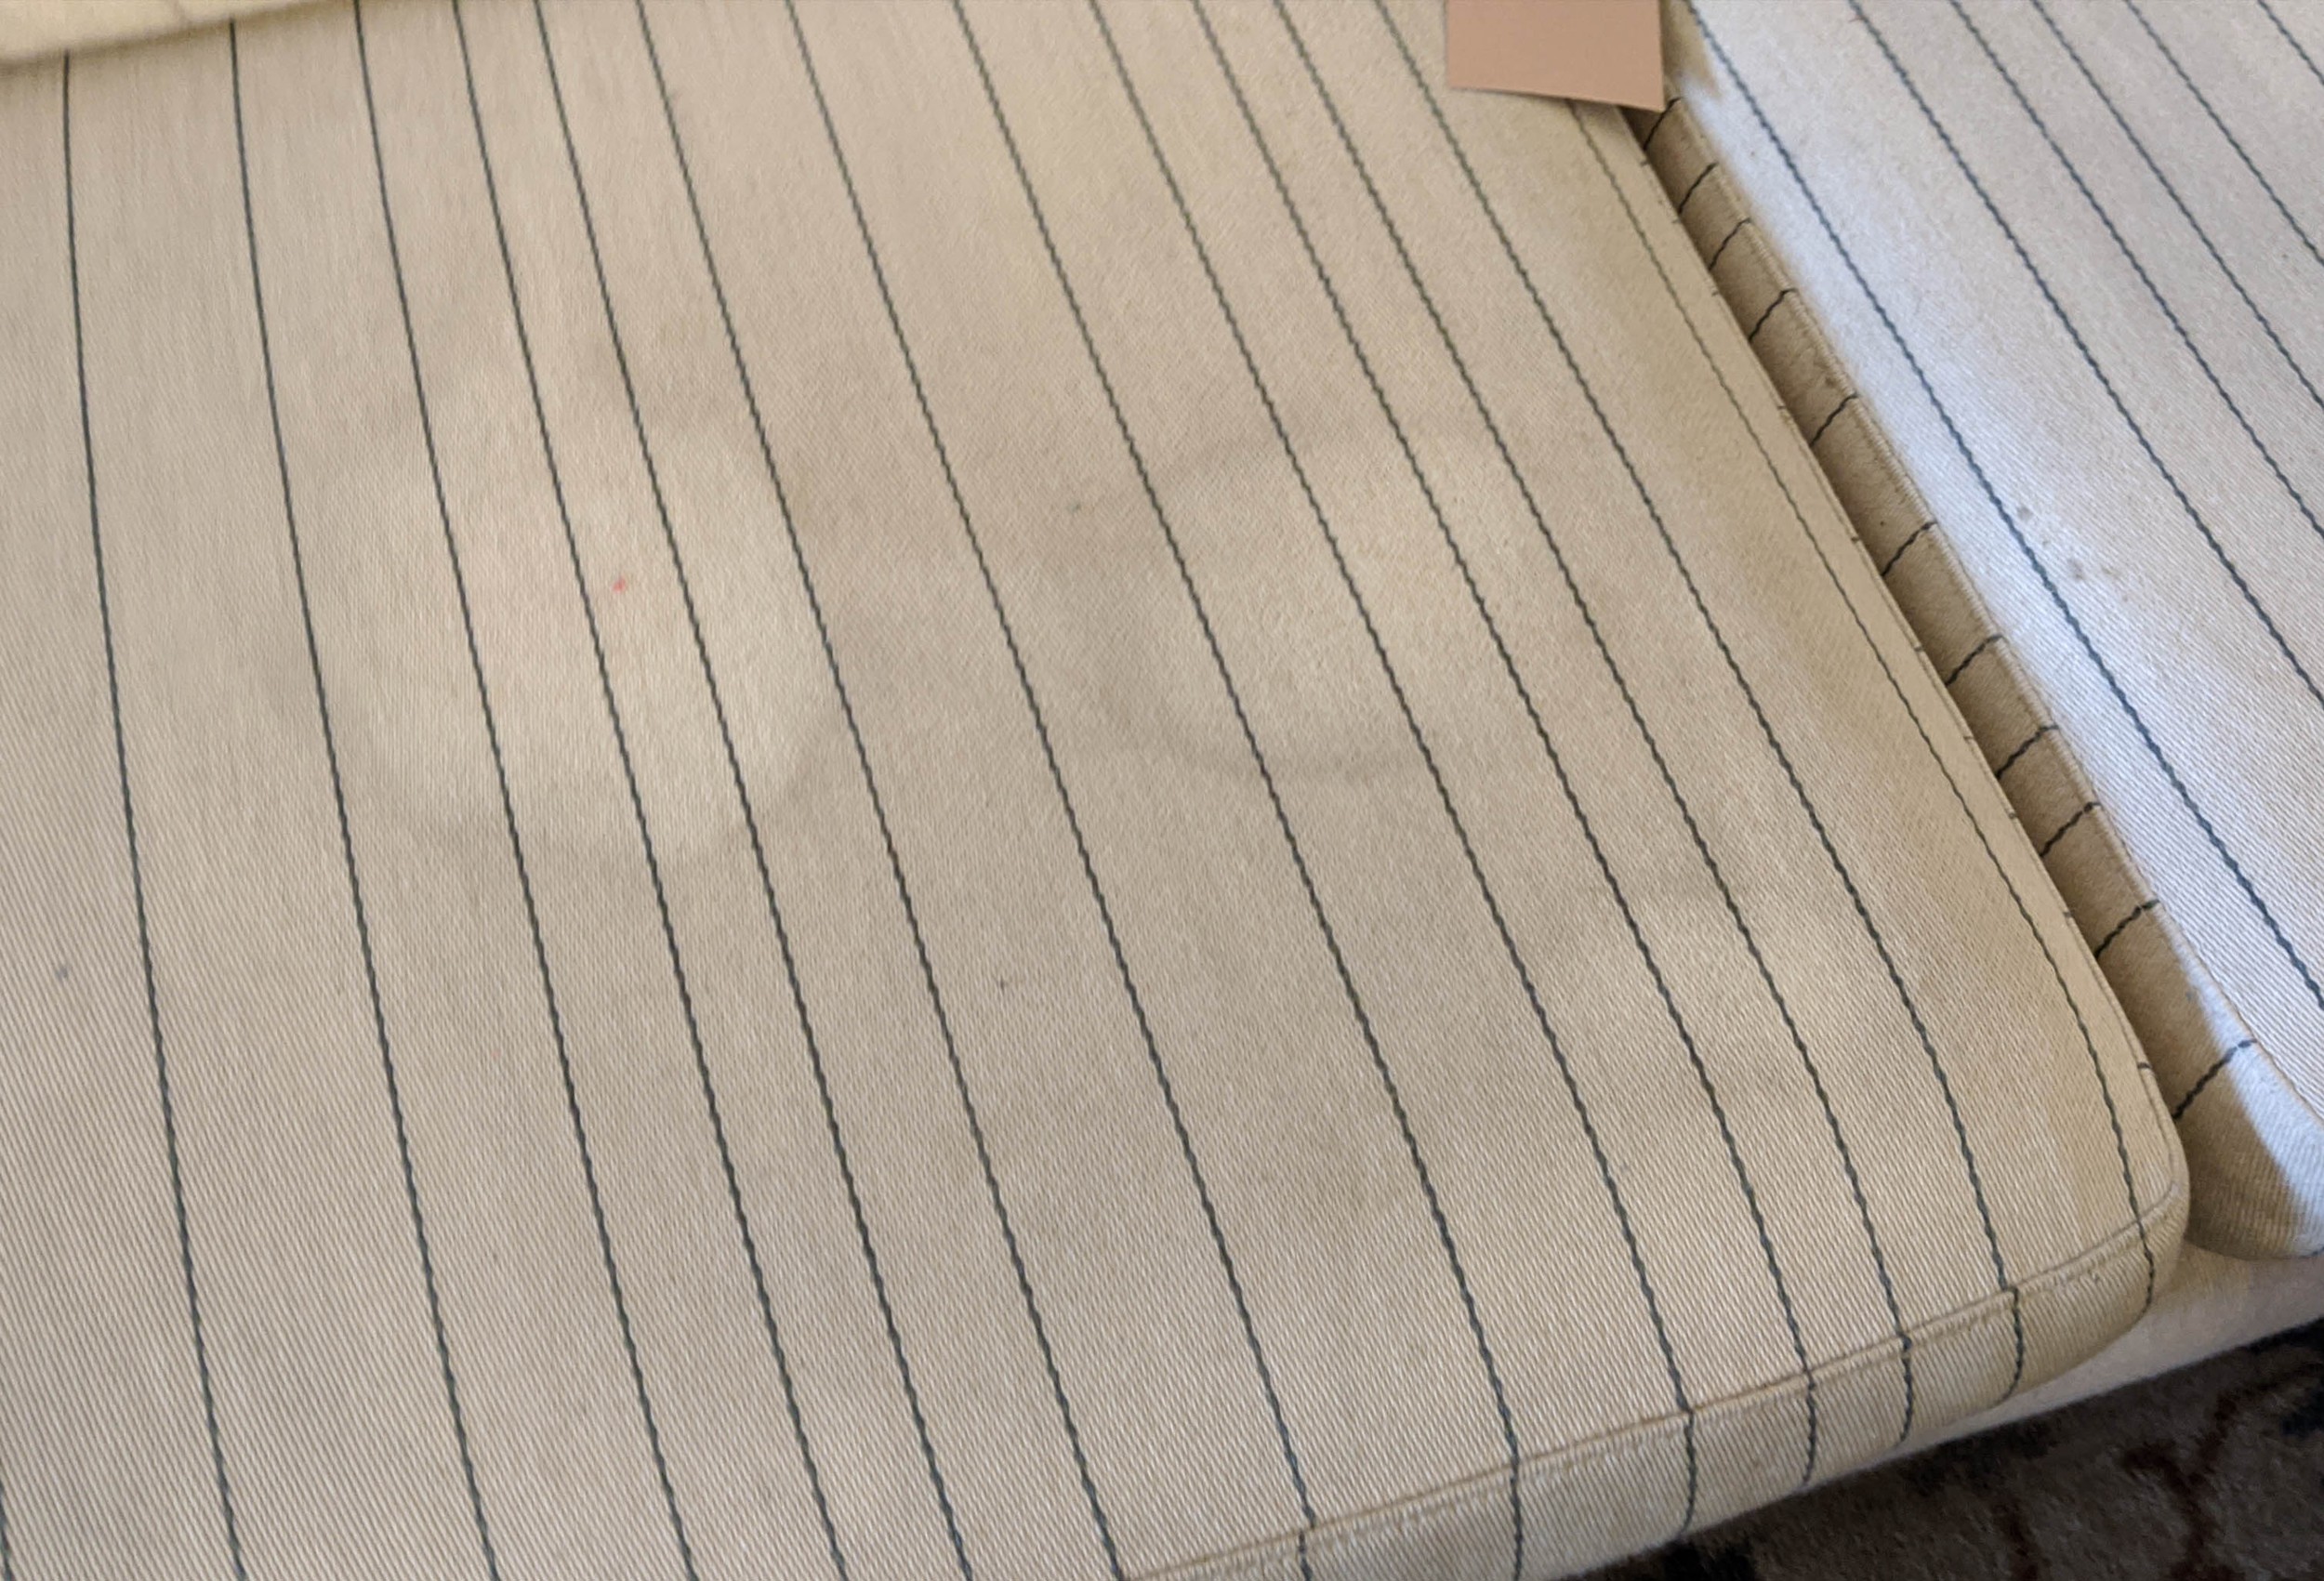 SOFA, 224cm striped upholstery. (fabric needs cleaning) - Image 3 of 4